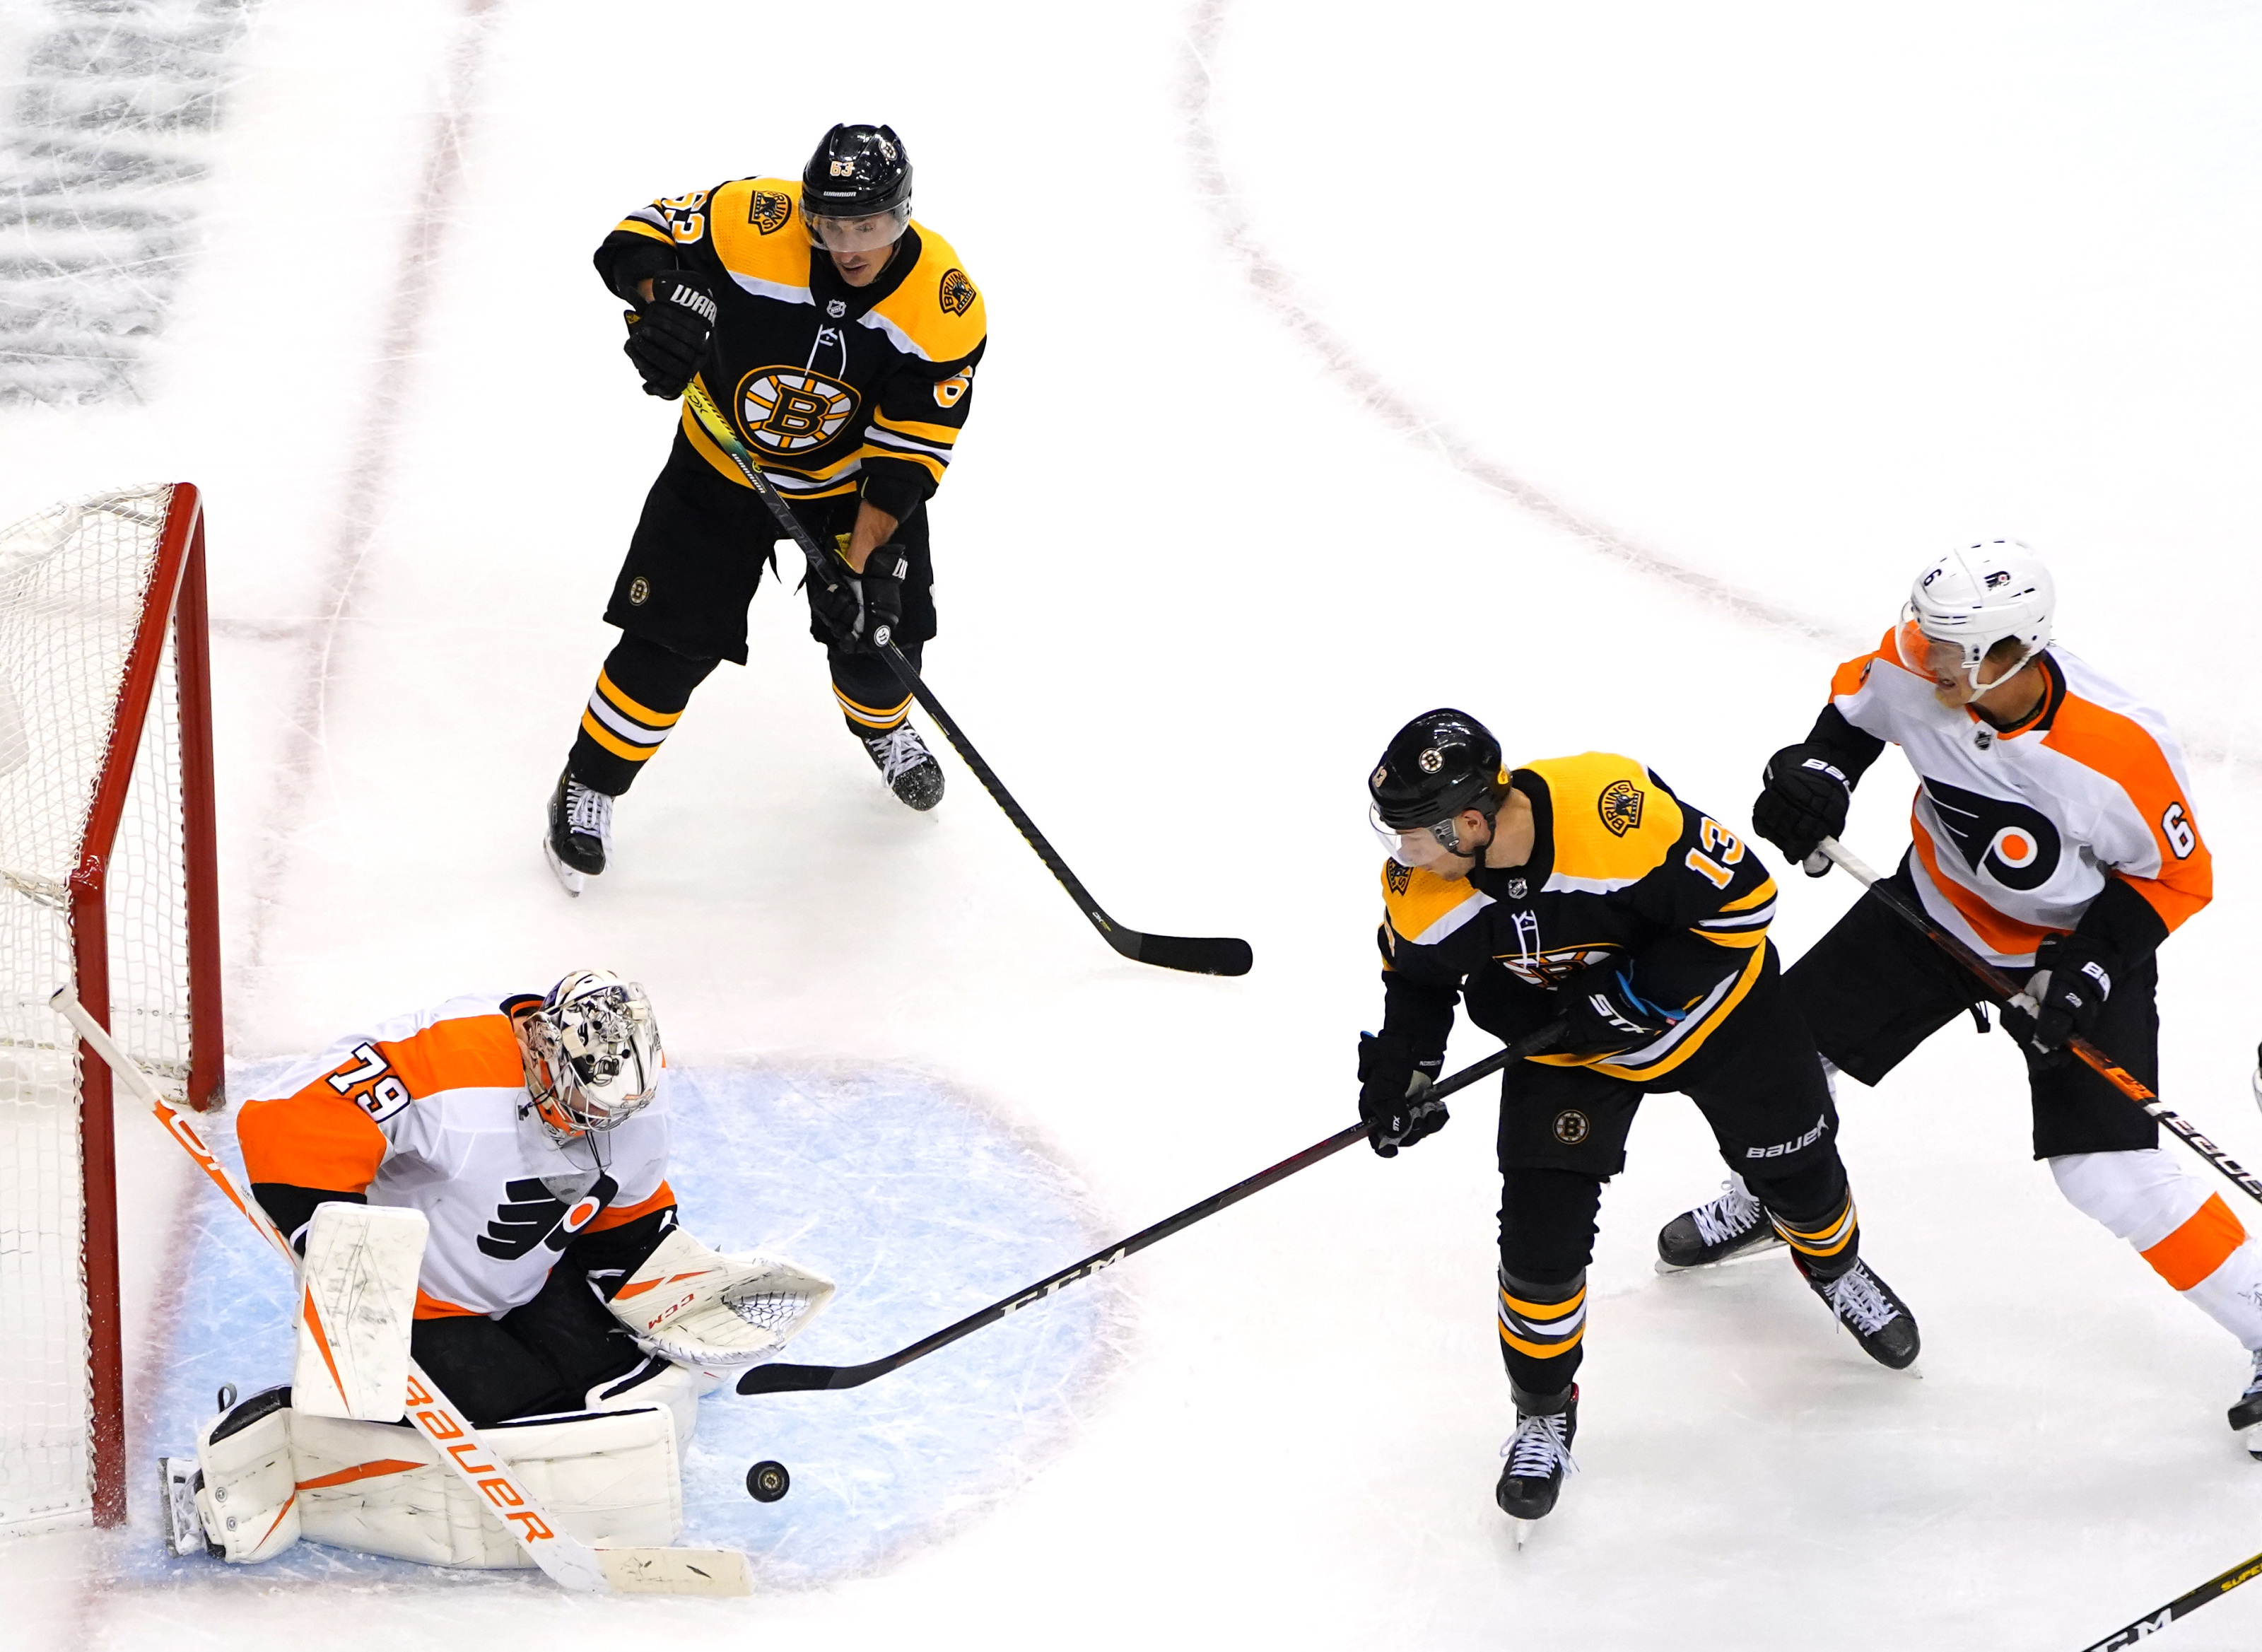 The Boston Bruins take on the Philadelphia Flyers in the second